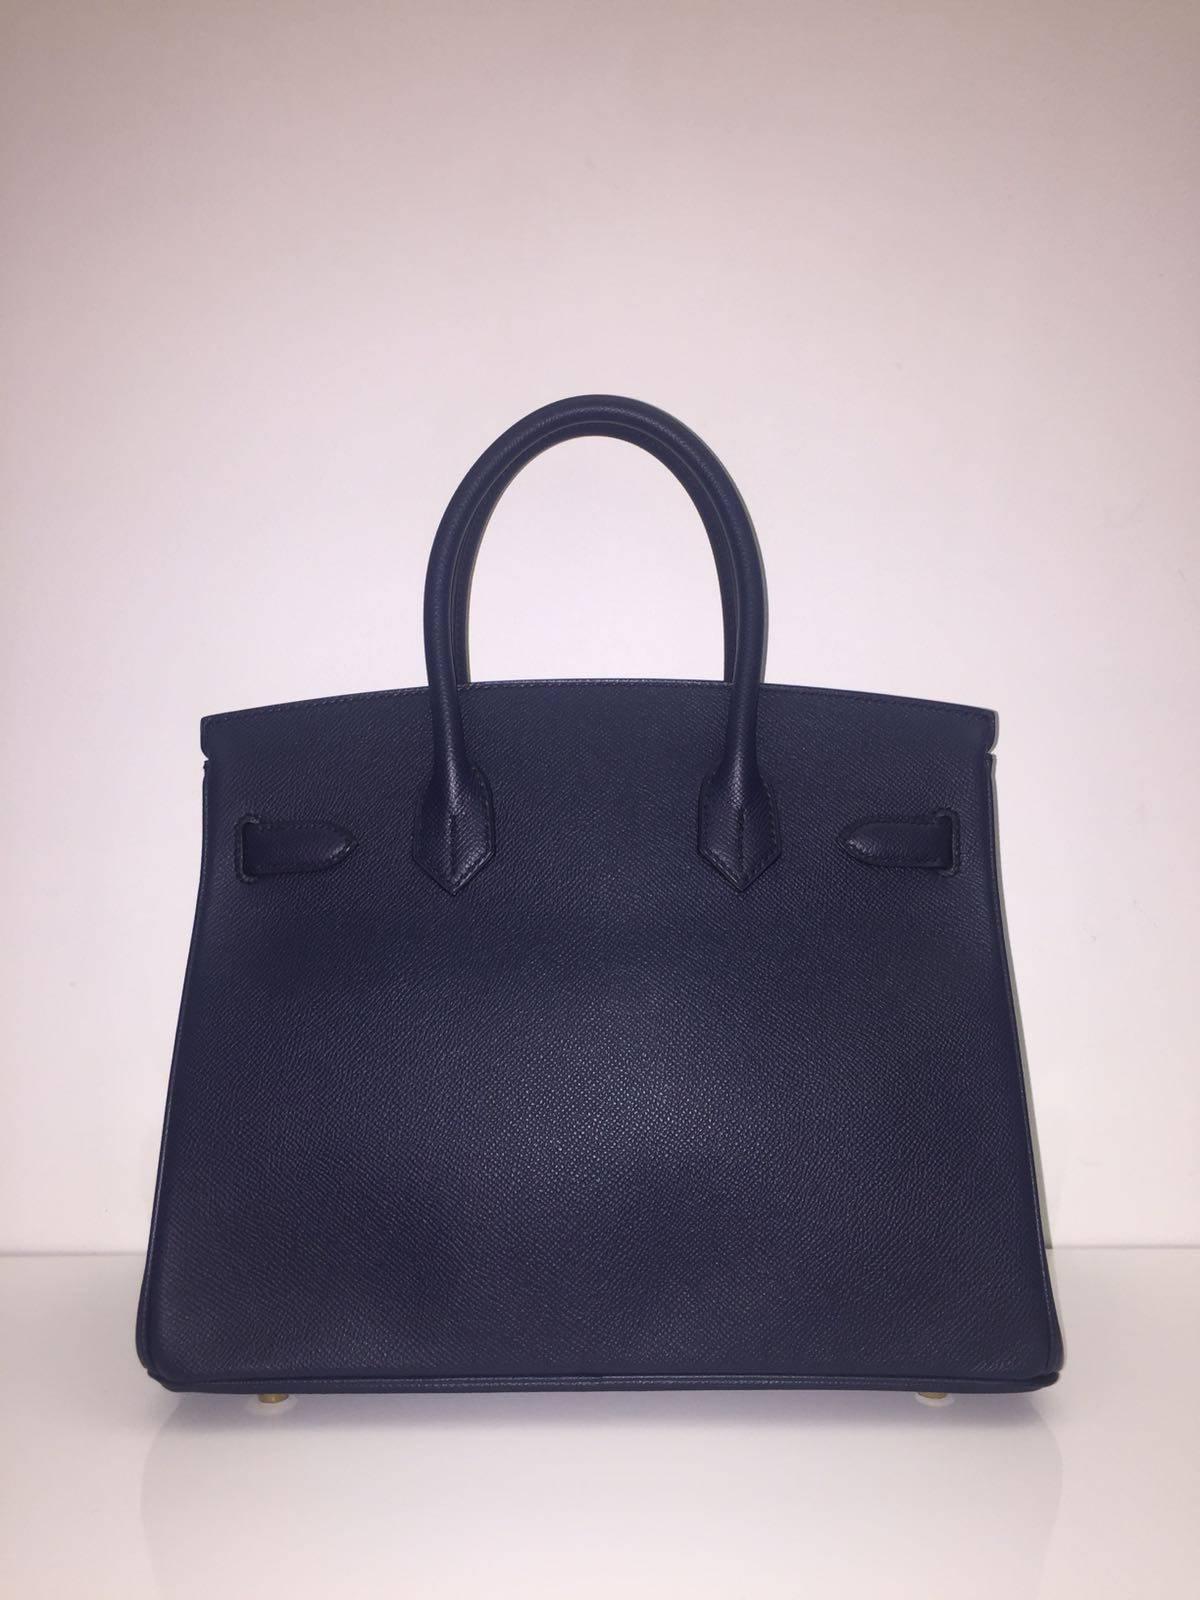 Hermes 
Birkin Size 30
Epsom Leather 
Color Blue Indigo
Gold Hardware 
store fresh, comes with receipt and full set (dust bag, box...) 
Hydeparkfashion specializes in sourcing and delivering authentic luxury handbags, mainly Hermes, to client around